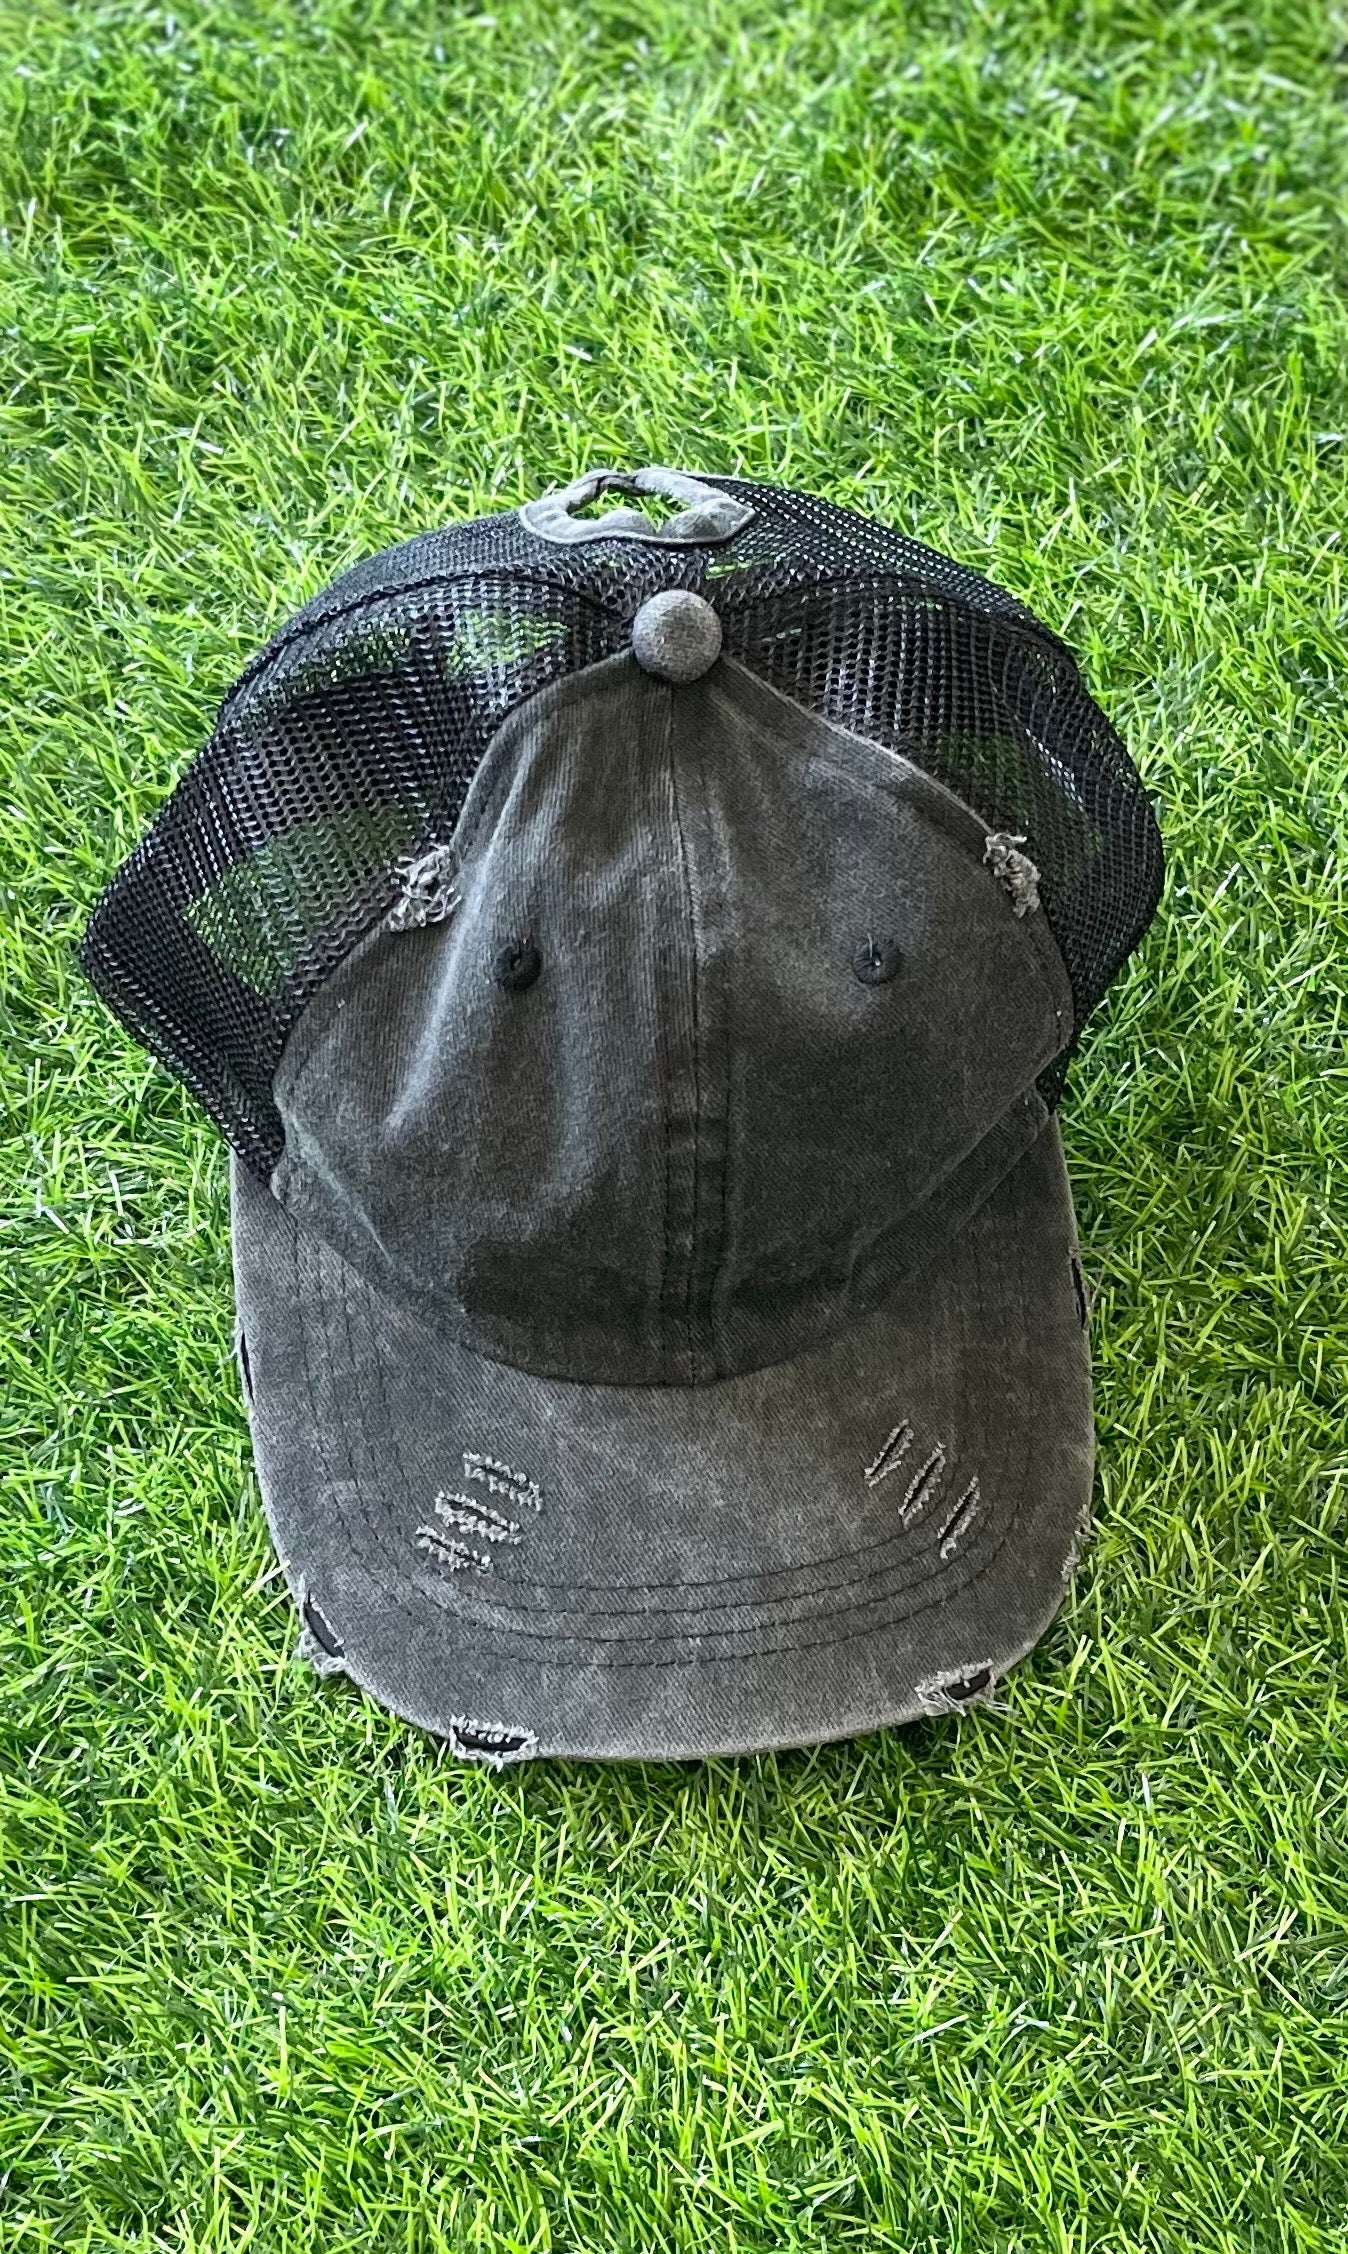 Parker, Ripped Distressed Baseball Cap!